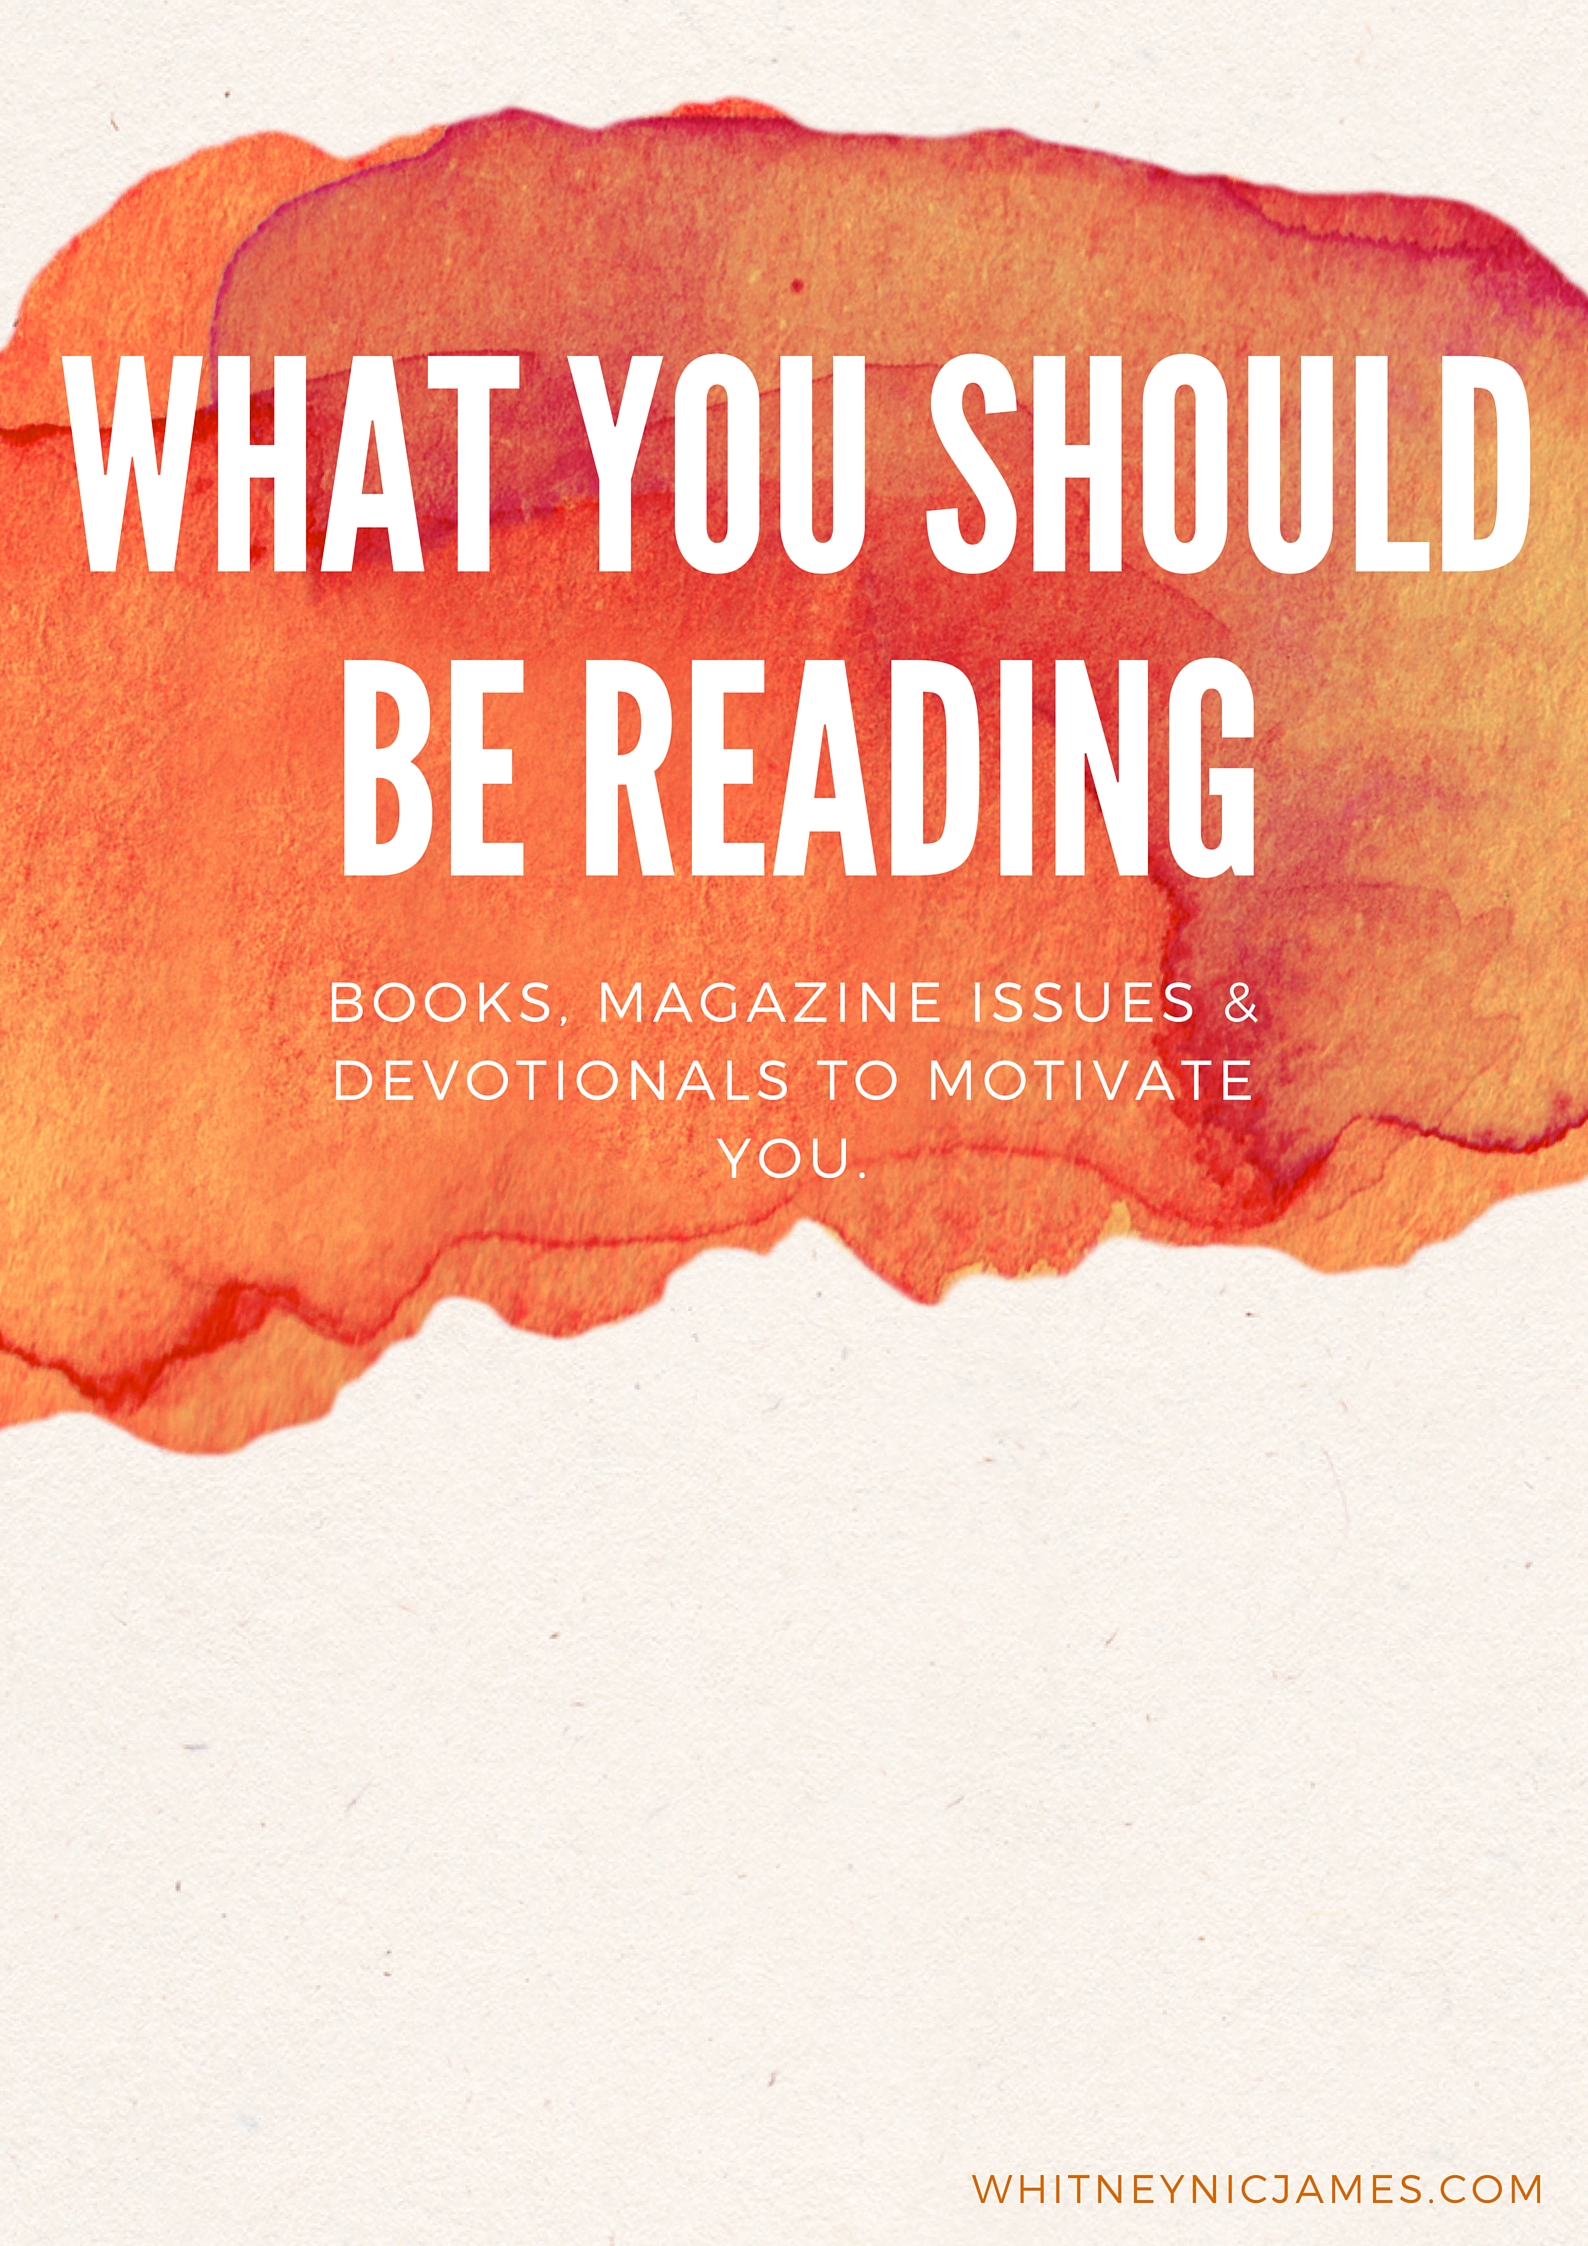 What You Should Be Reading